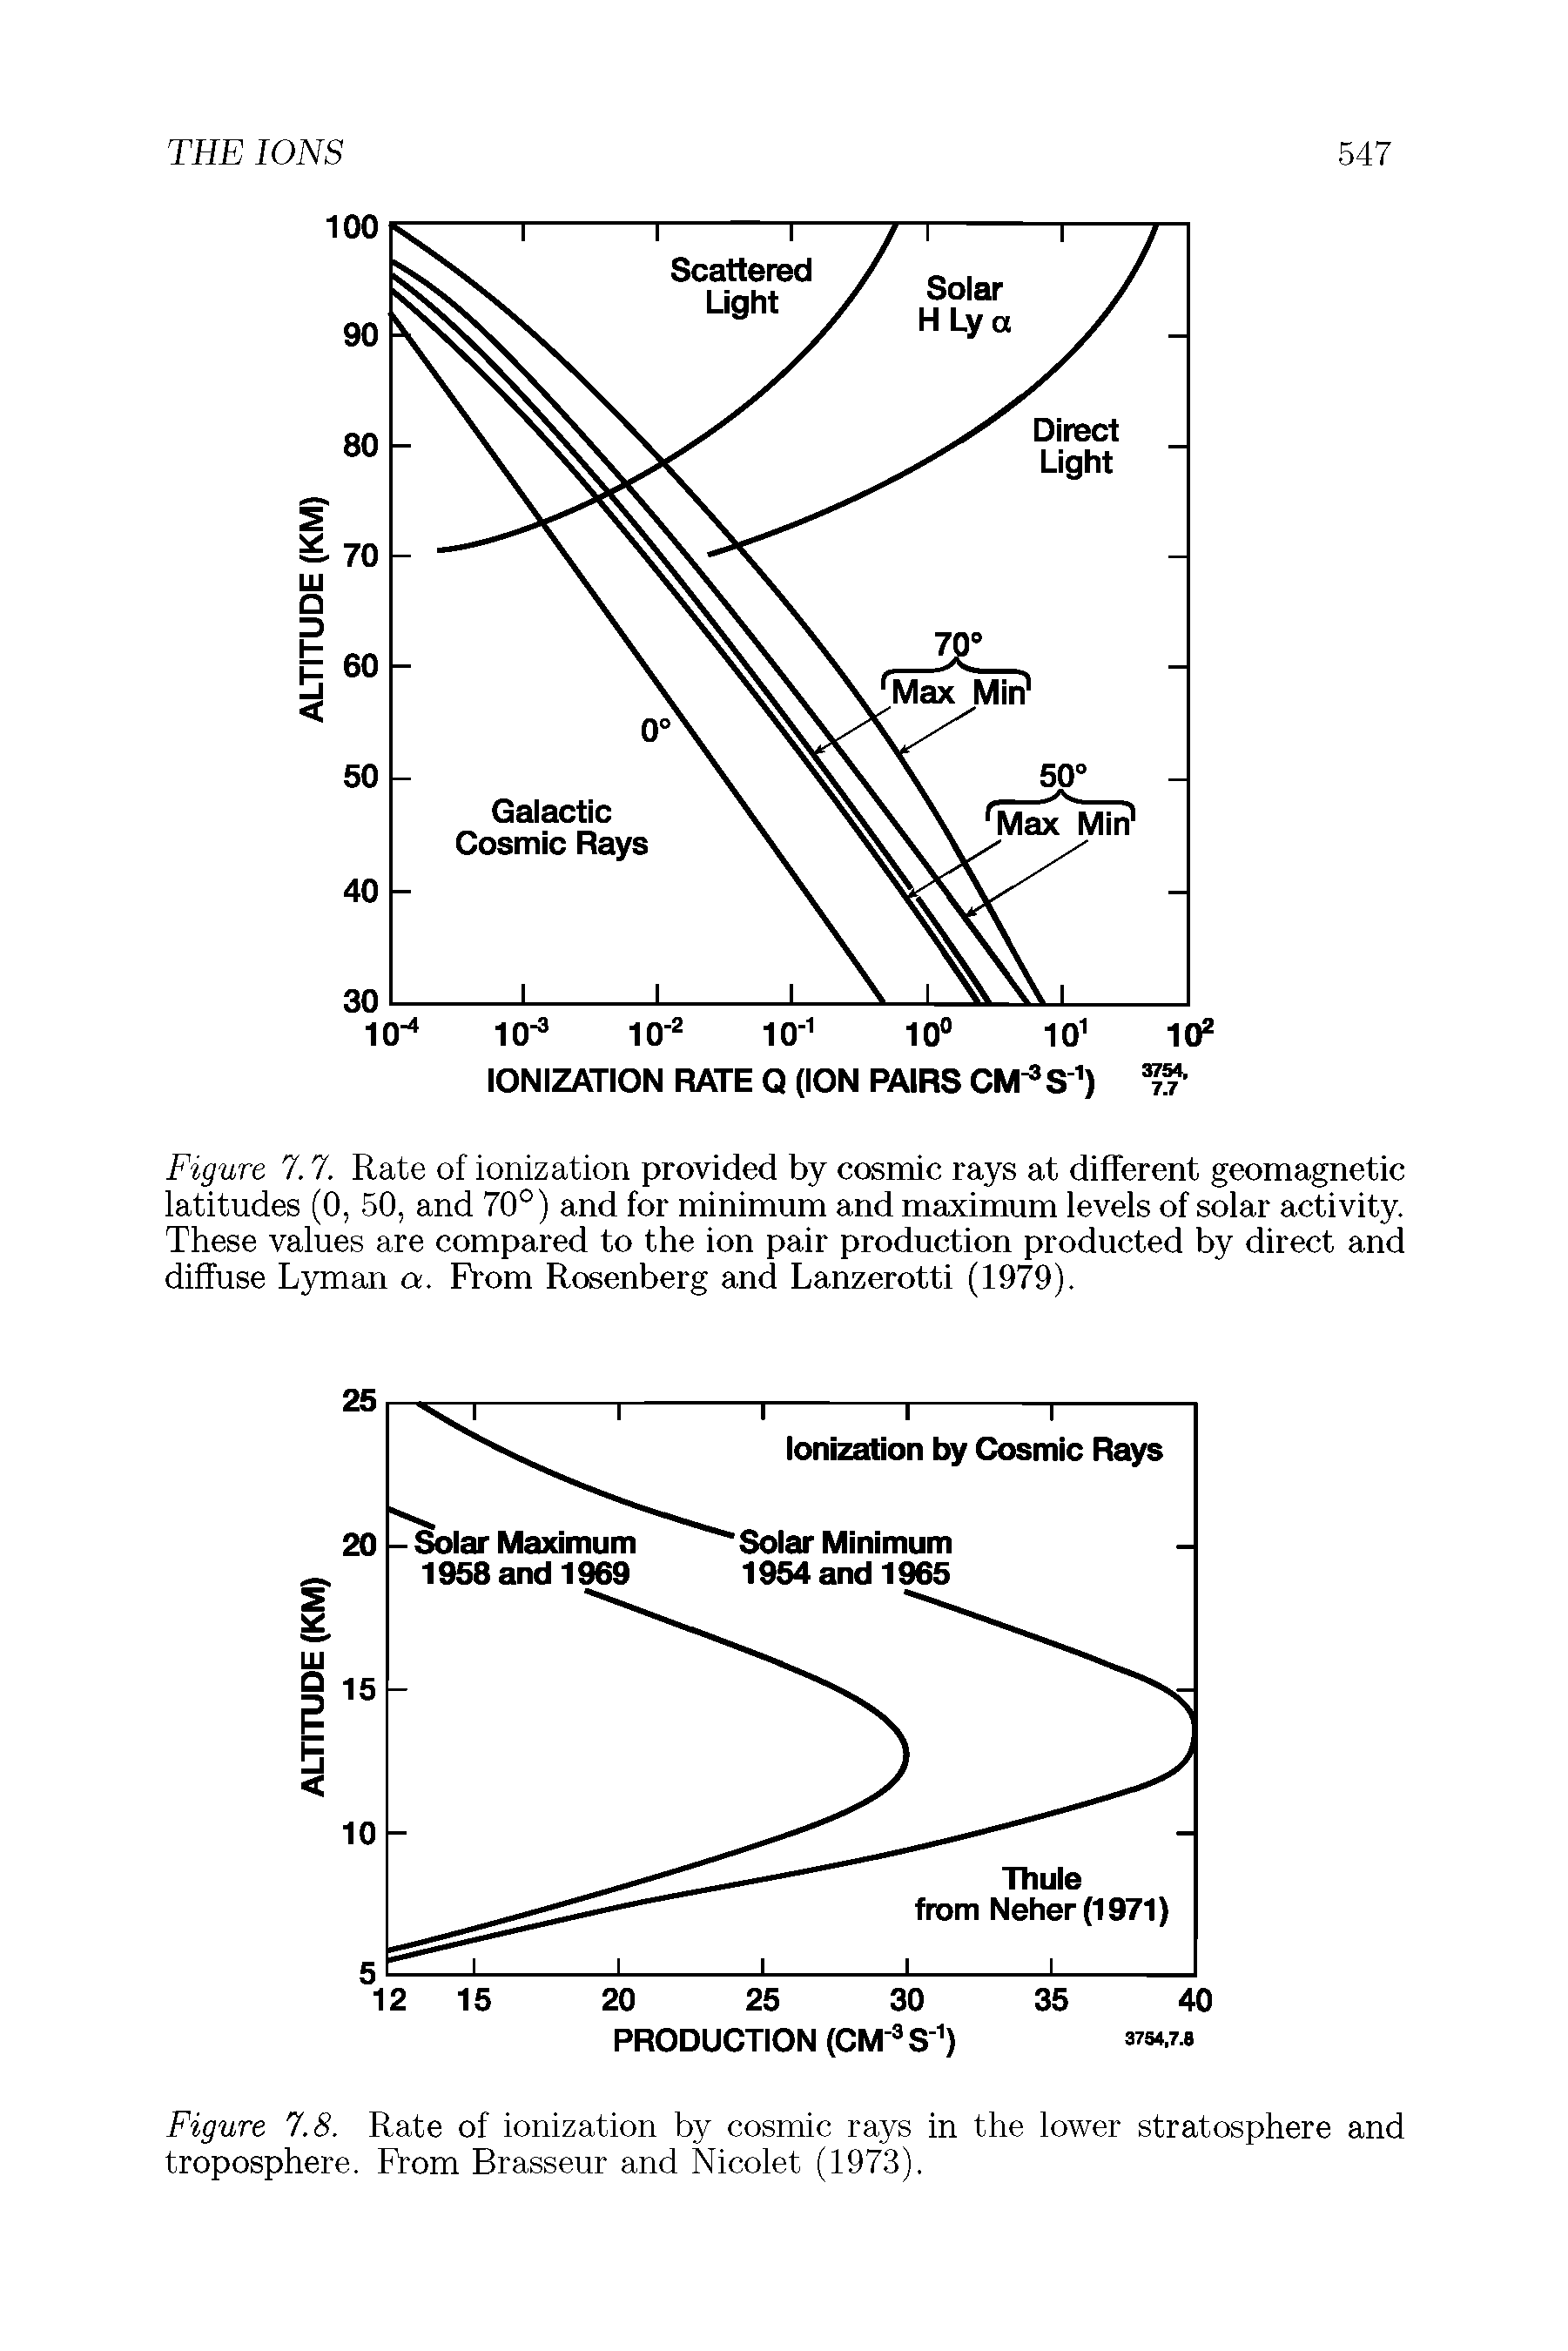 Figure 7.7. Rate of ionization provided by cosmic rays at different geomagnetic latitudes (0, 50, and 70°) and for minimum and maximum levels of solar activity. These values are compared to the ion pair production producted by direct and diffuse Lyman a. From Rosenberg and Lanzerotti (1979).